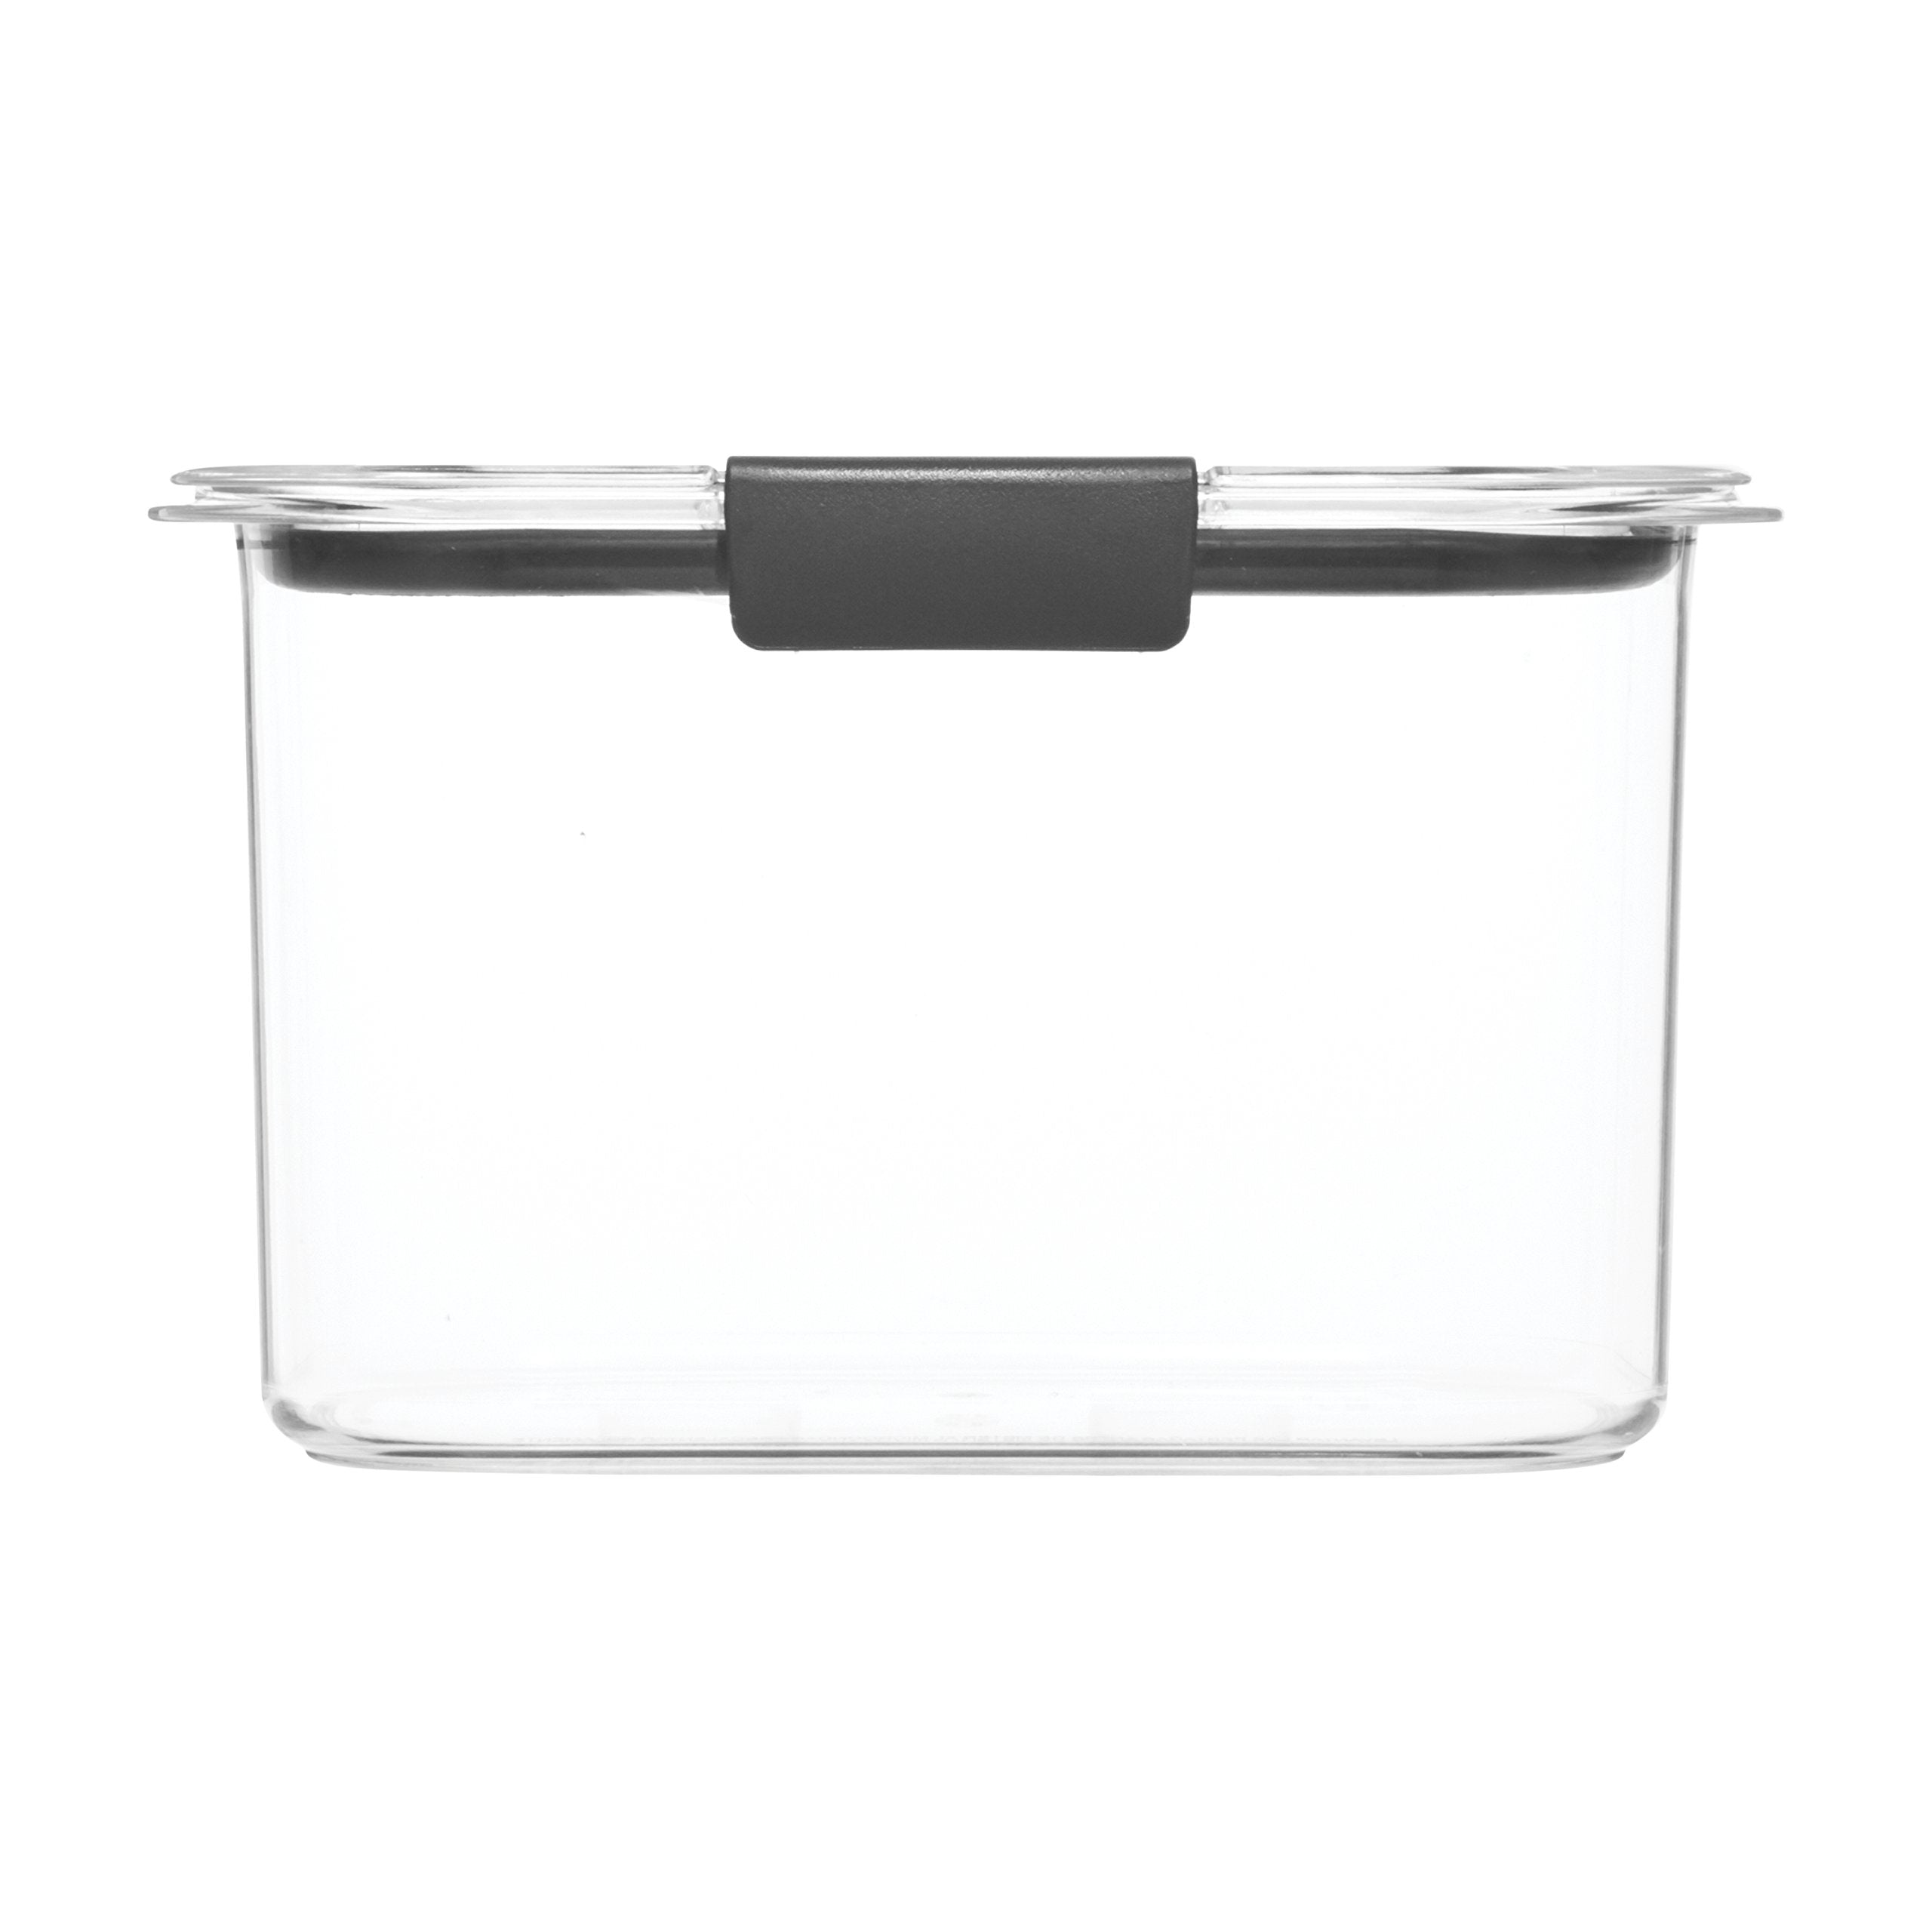 Rubbermaid Brilliance Pantry Airtight Food Storage Containers, Plastic, Brown Sugar, 1.8L